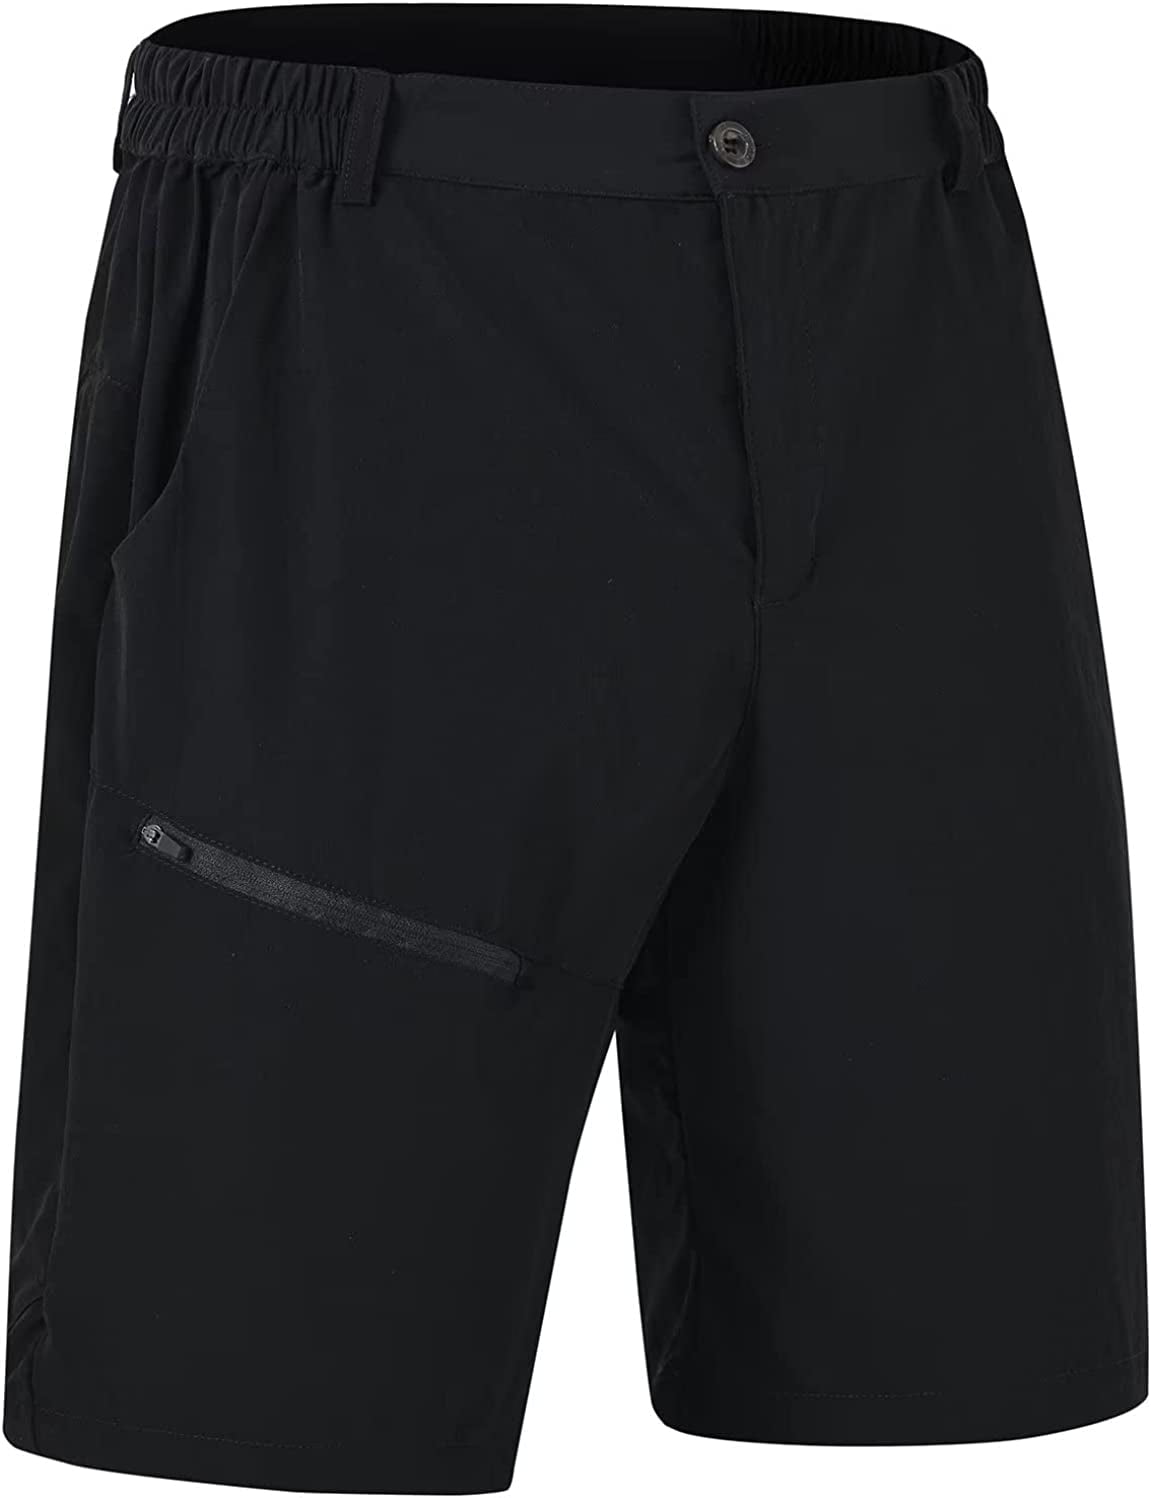 HUK Men's Next Level 7 Quick-Drying Performance Fishing Shorts with UPF  30+ Sun Protection